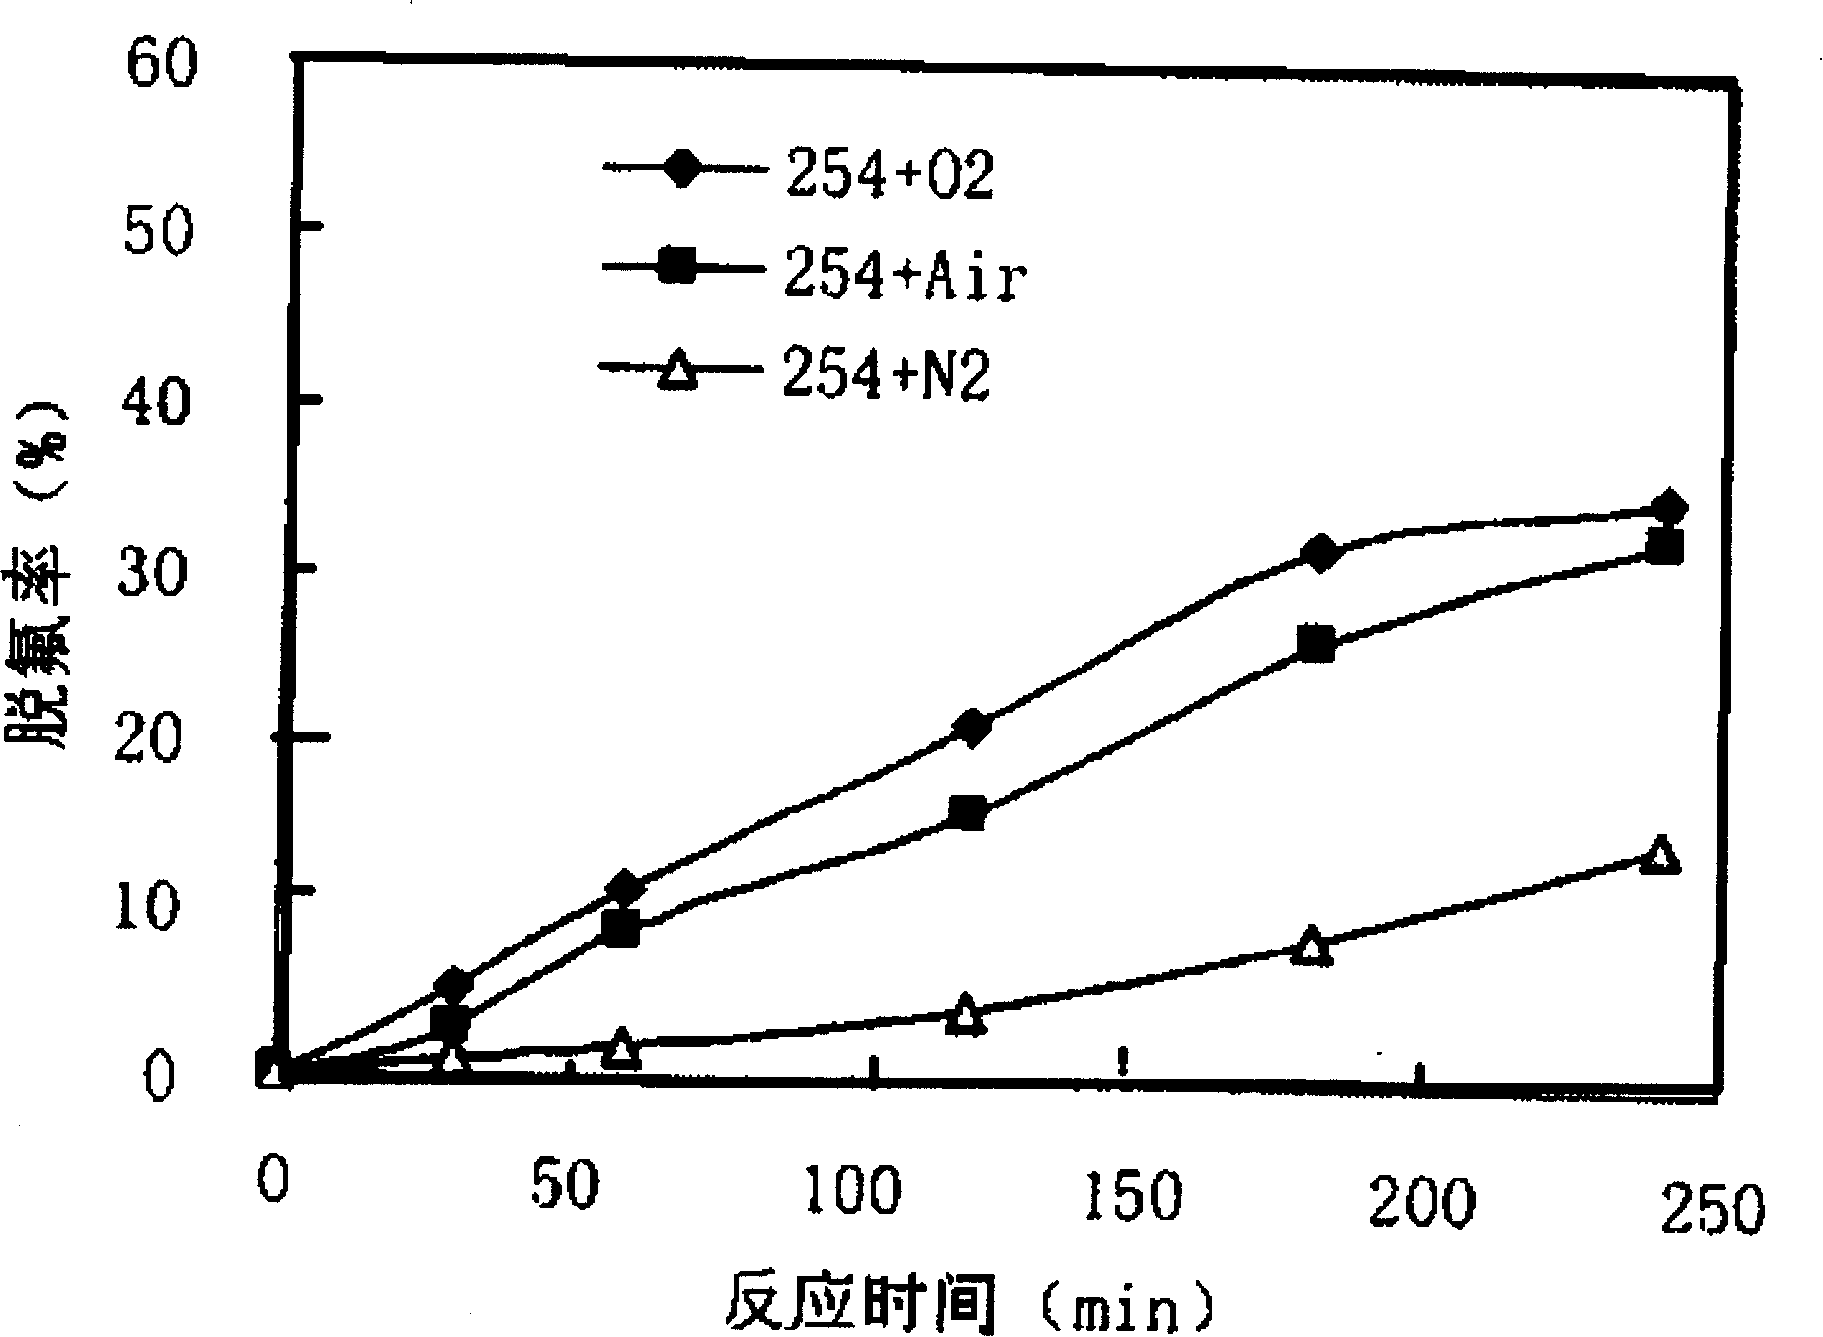 Method of dissolubility iron salt induction photochemical degradation total fluorination substituted compound